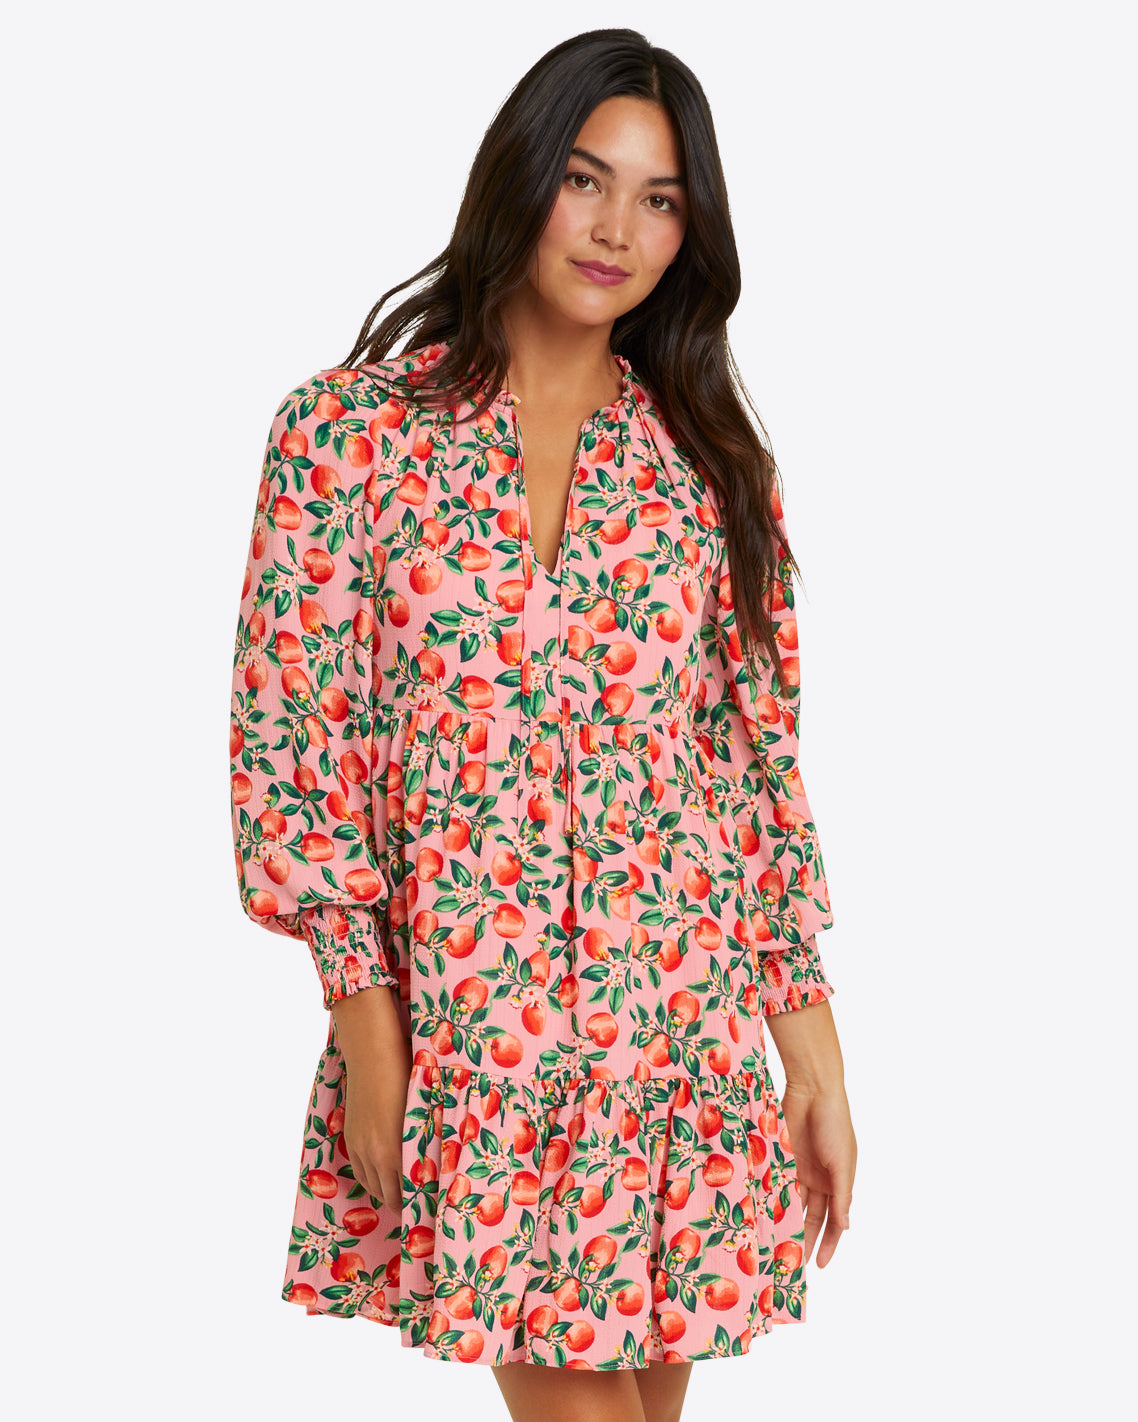 Connie Long Sleeve Mini Dress in Apple Blossom Floral